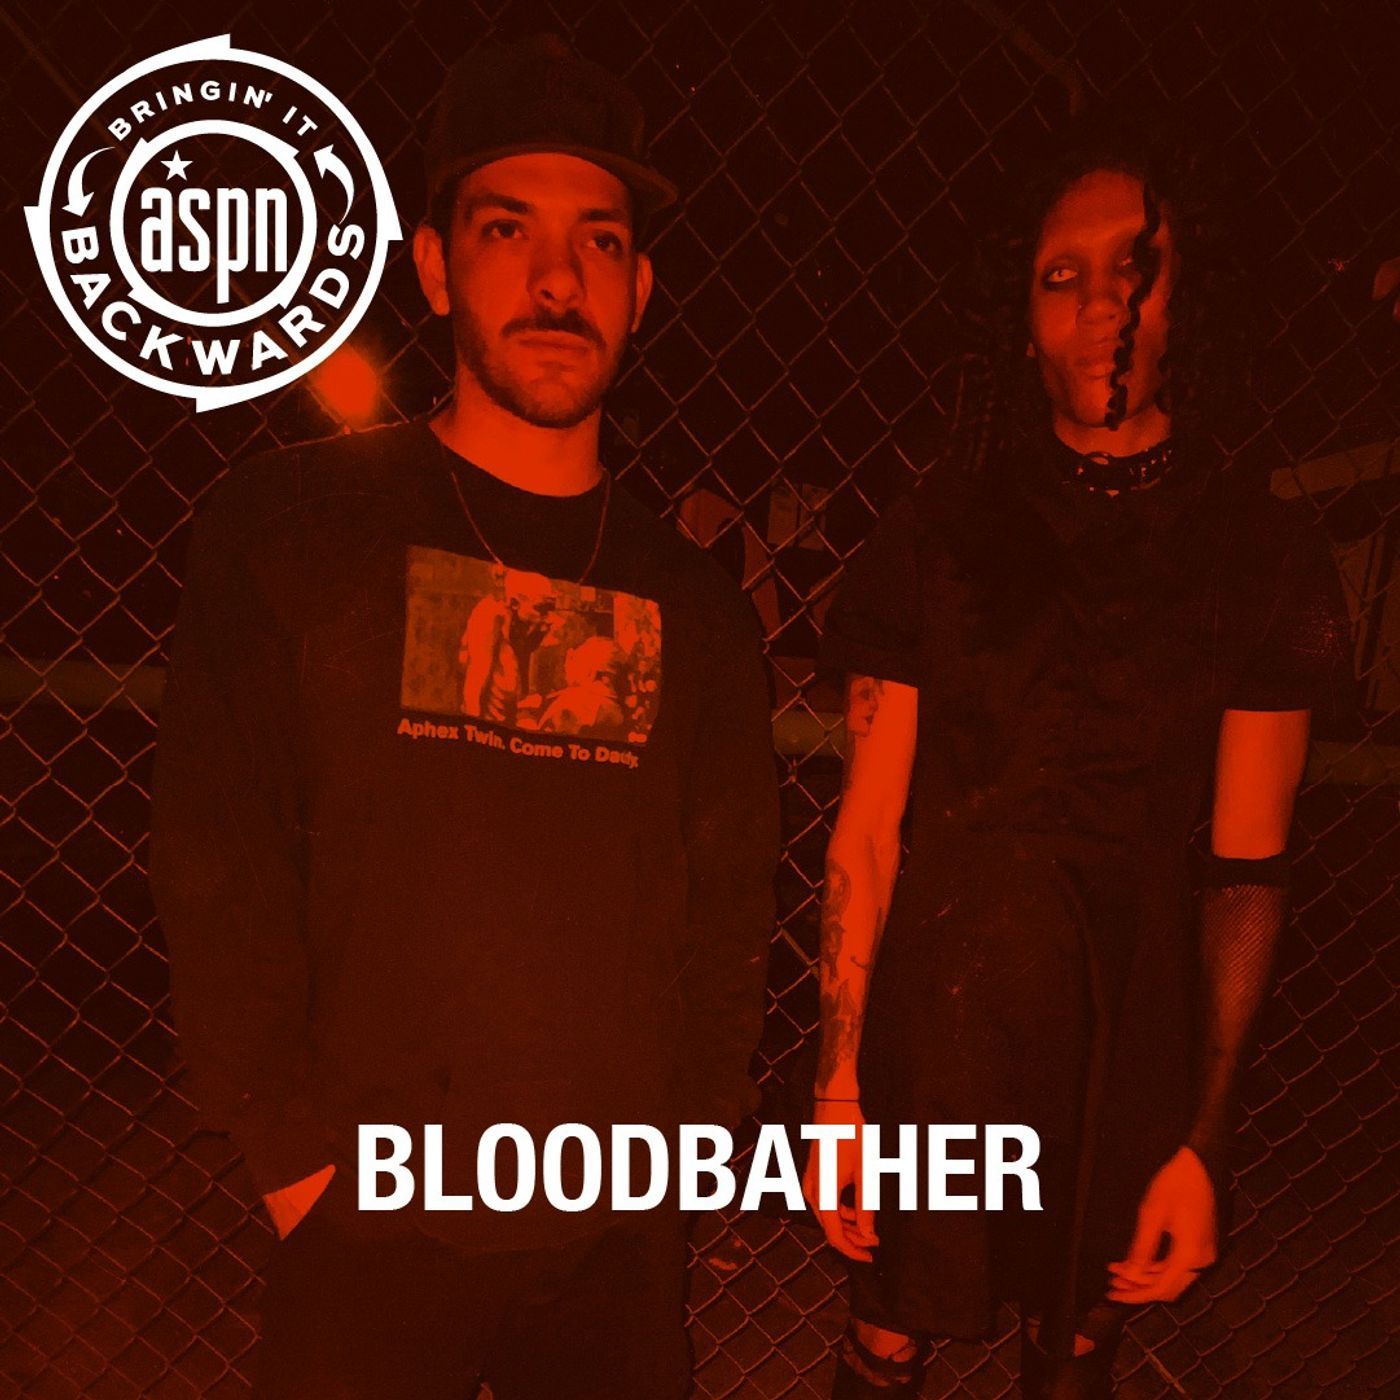 Interview with Bloodbather Image